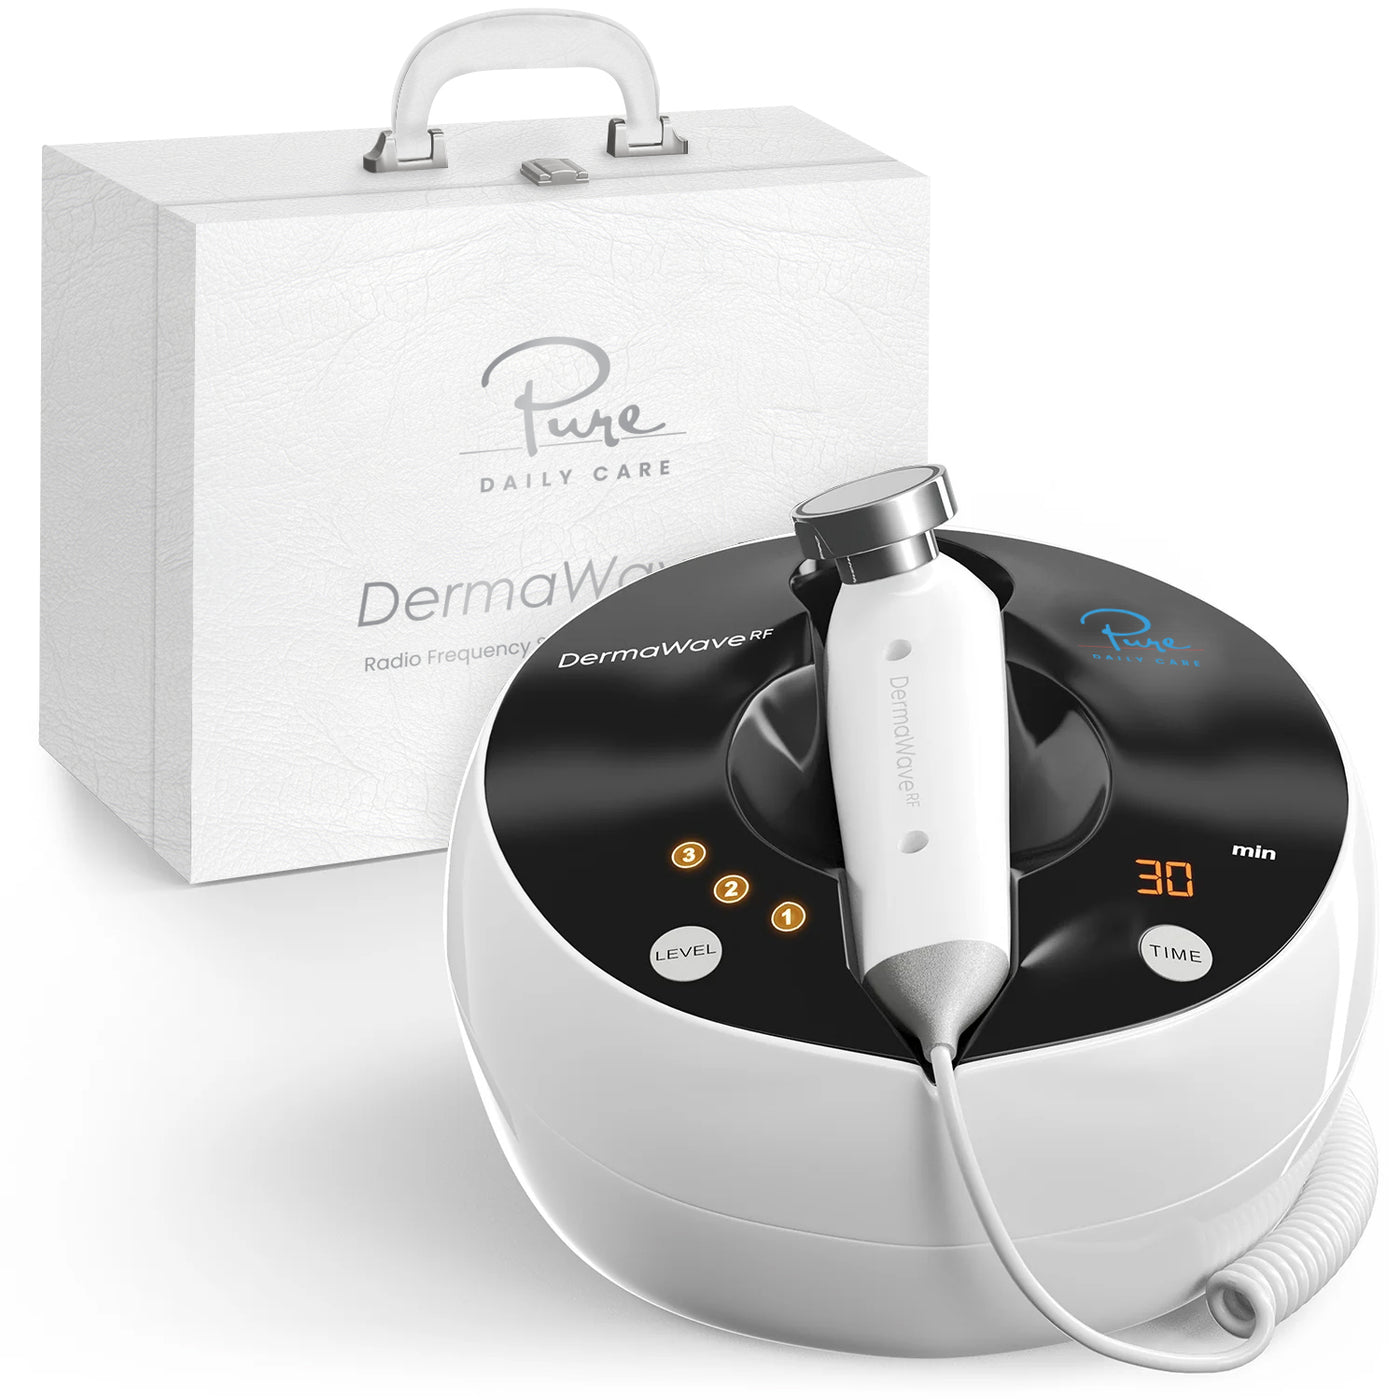 DermaWave Clinical Radio Frequency Machine